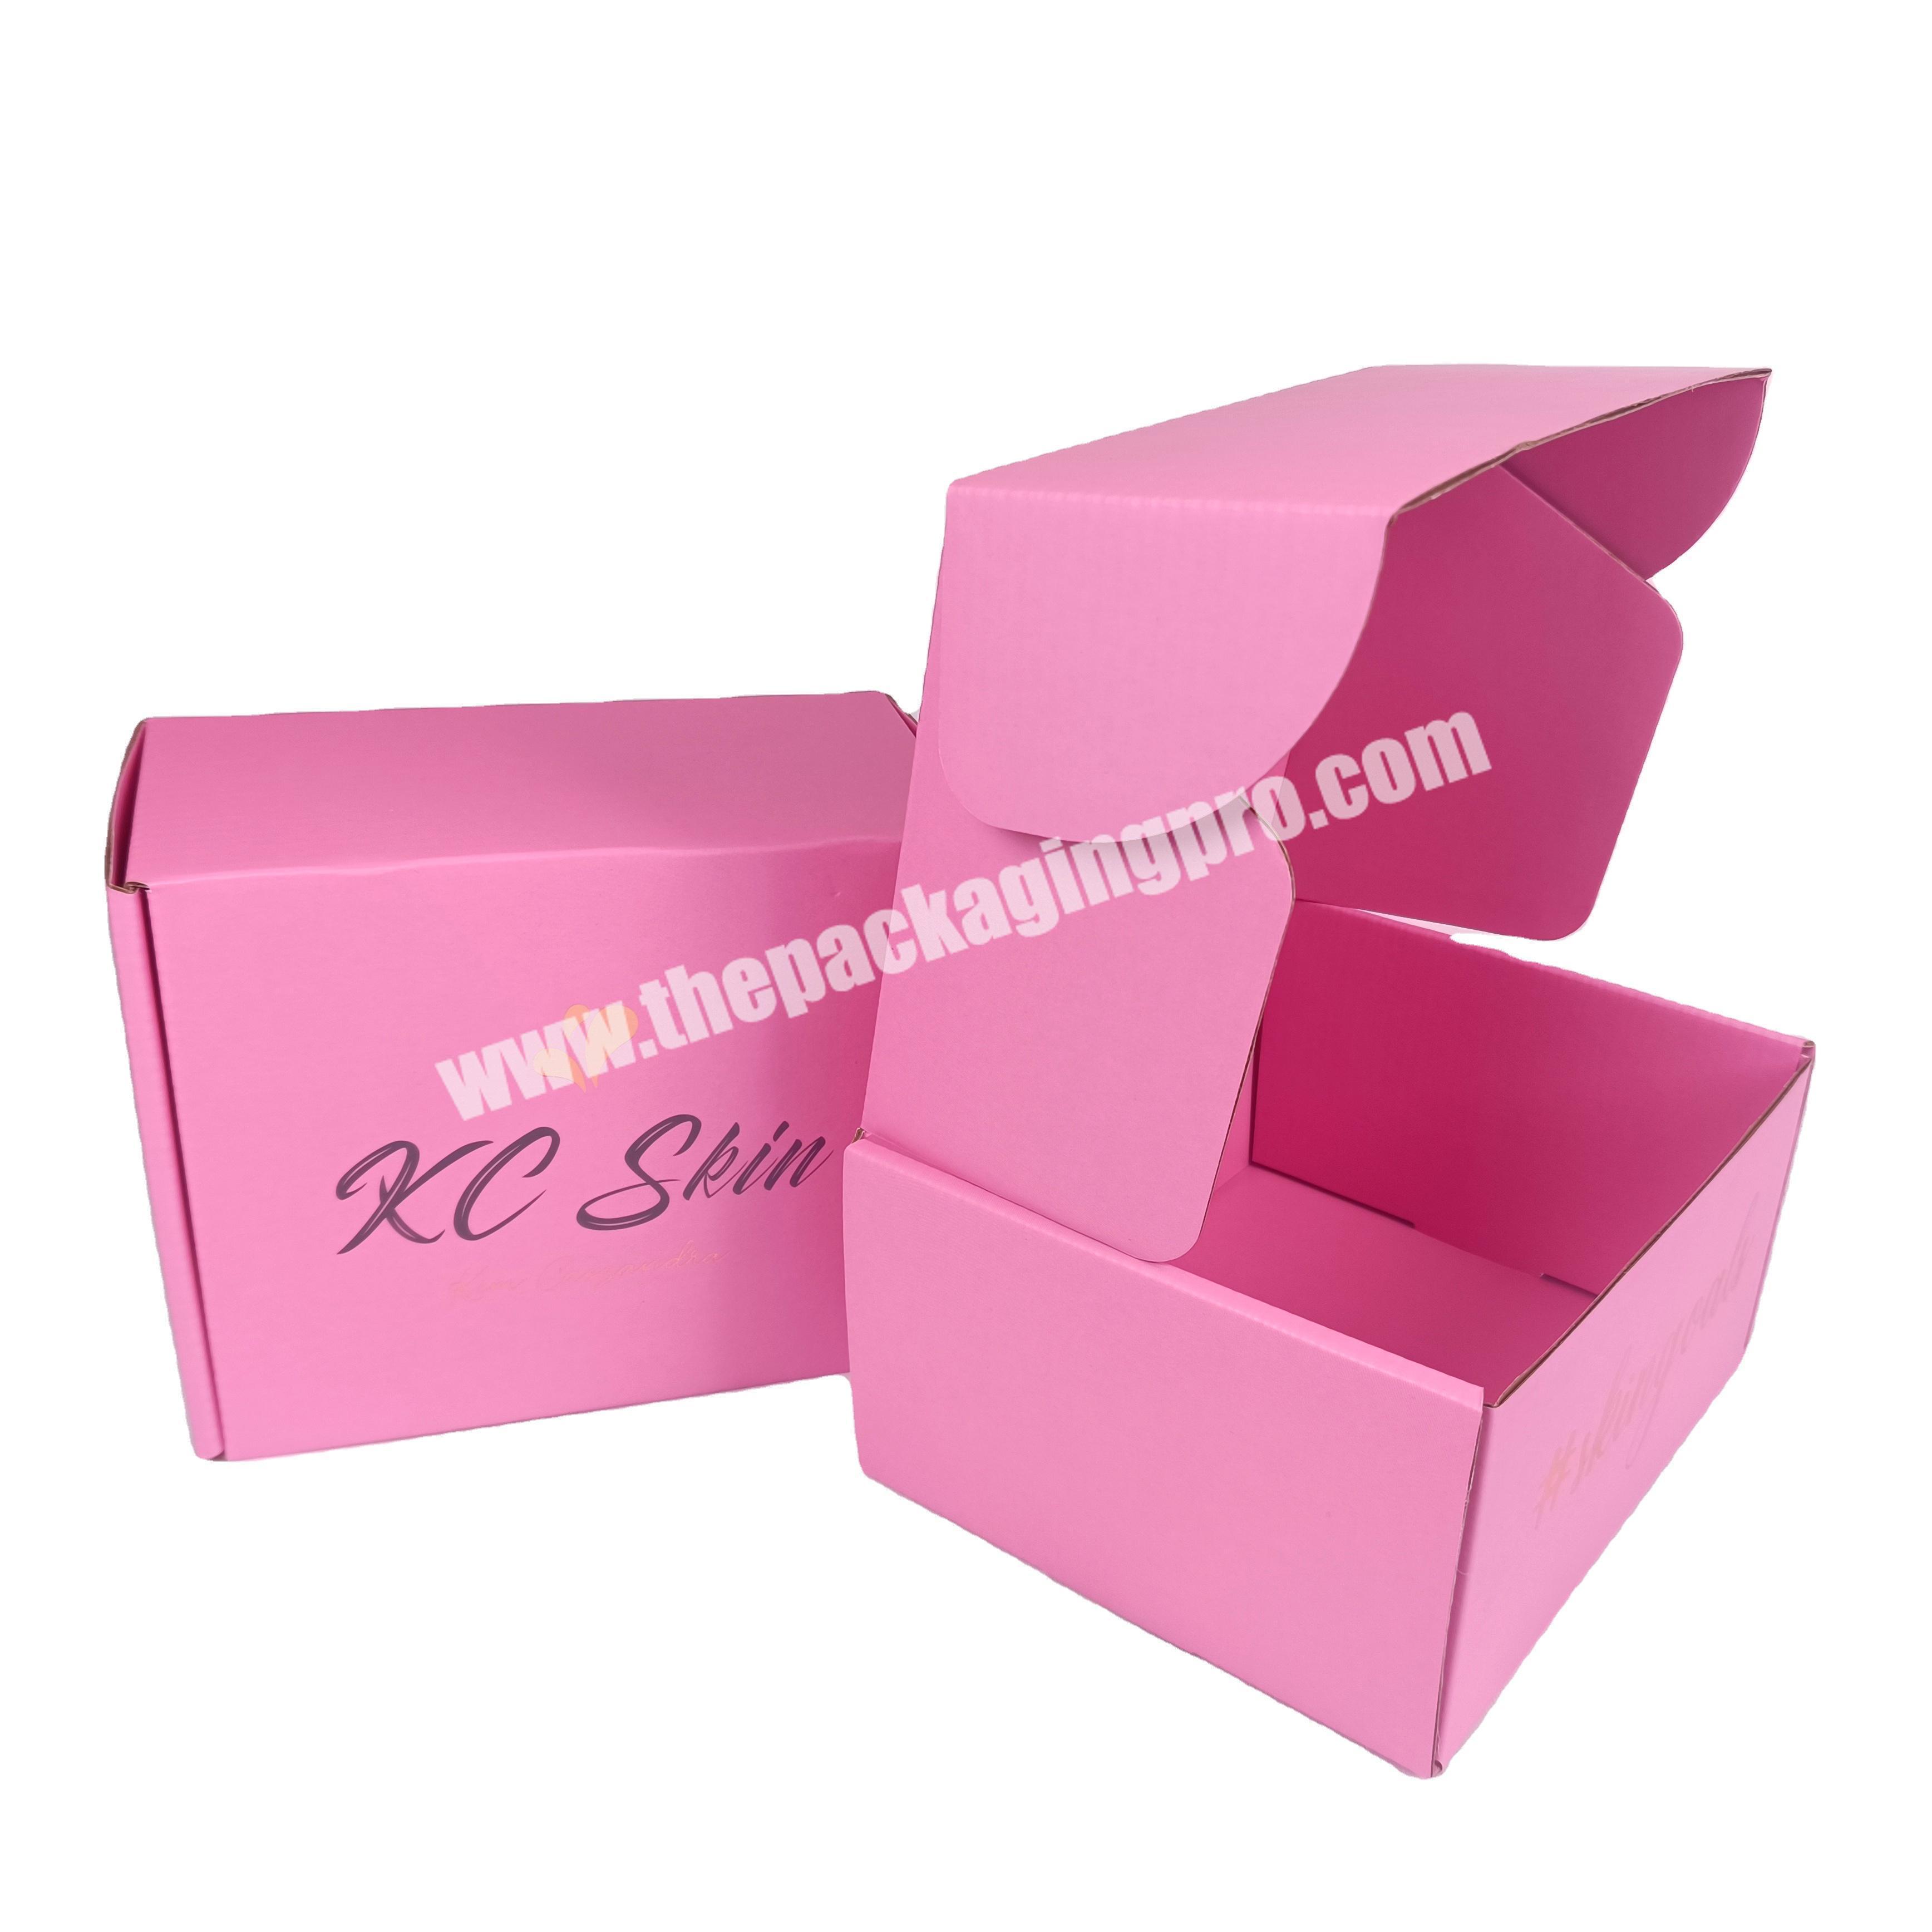 Corrugated E-flute gold foil custom  shipping boxes mailer packaging boxes for Clothing Shoes Dress Apparel  Lingerie mailer